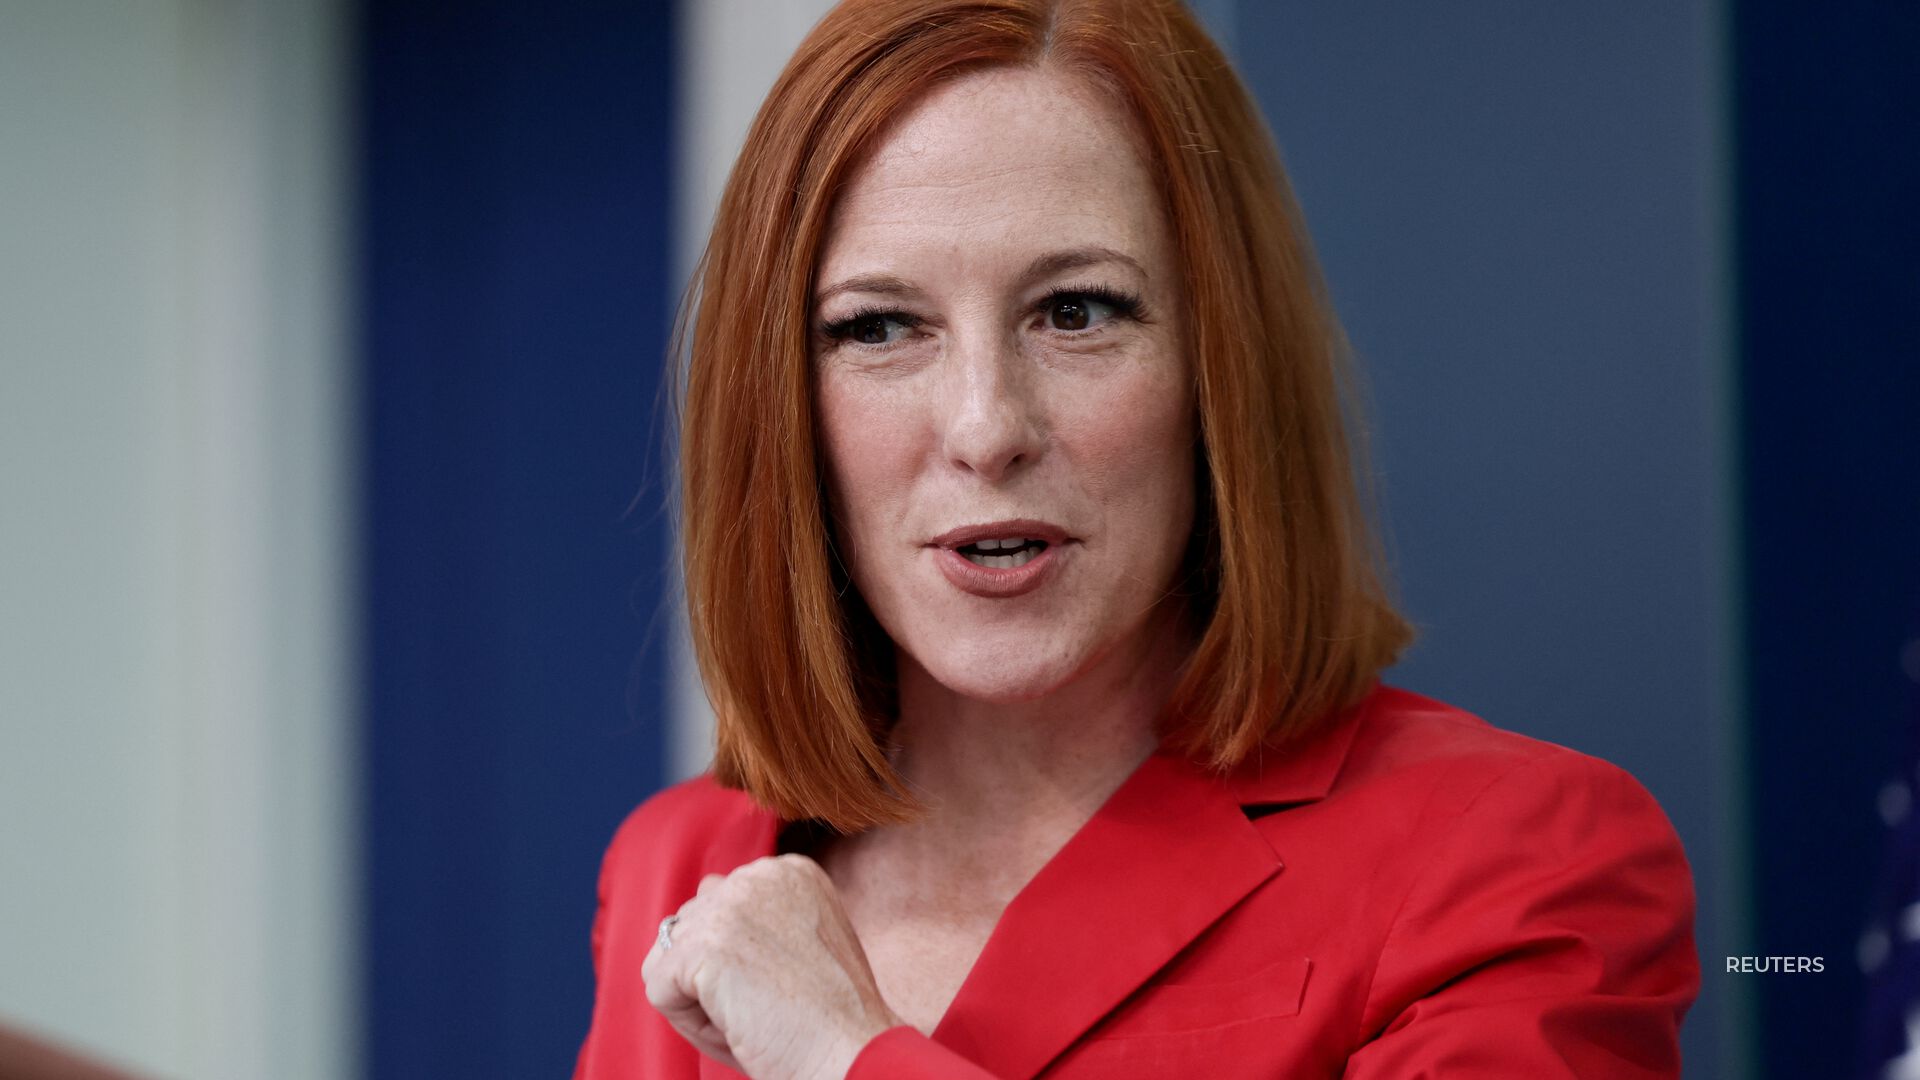 Jen Psaki mentioned Section 230 in response to a question about Elon Musk buying Twitter.